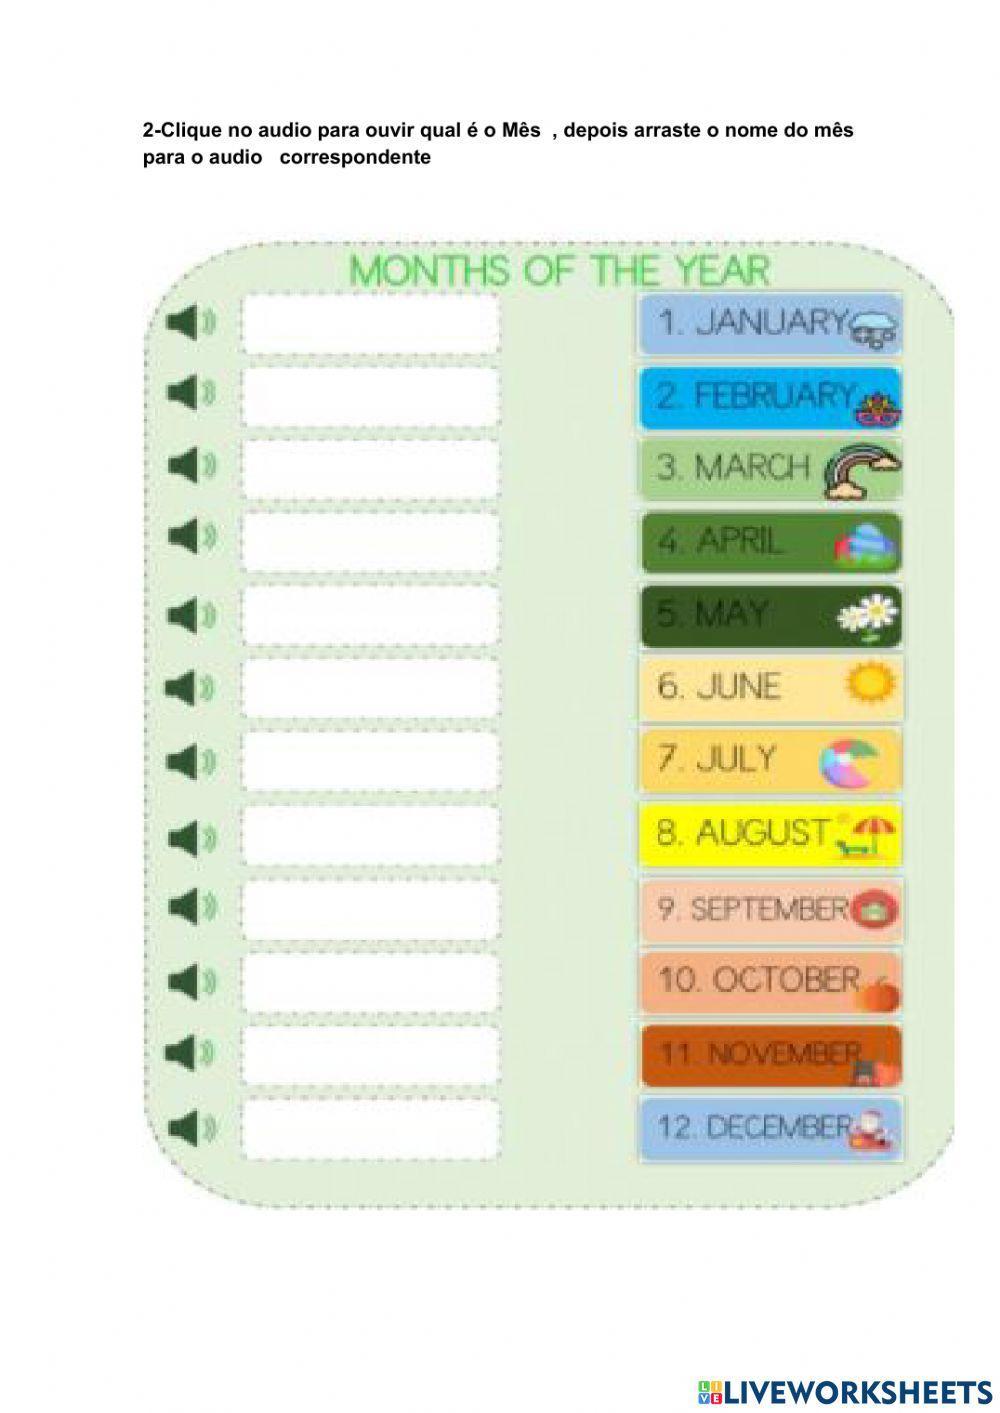 Days of the week and moths the year